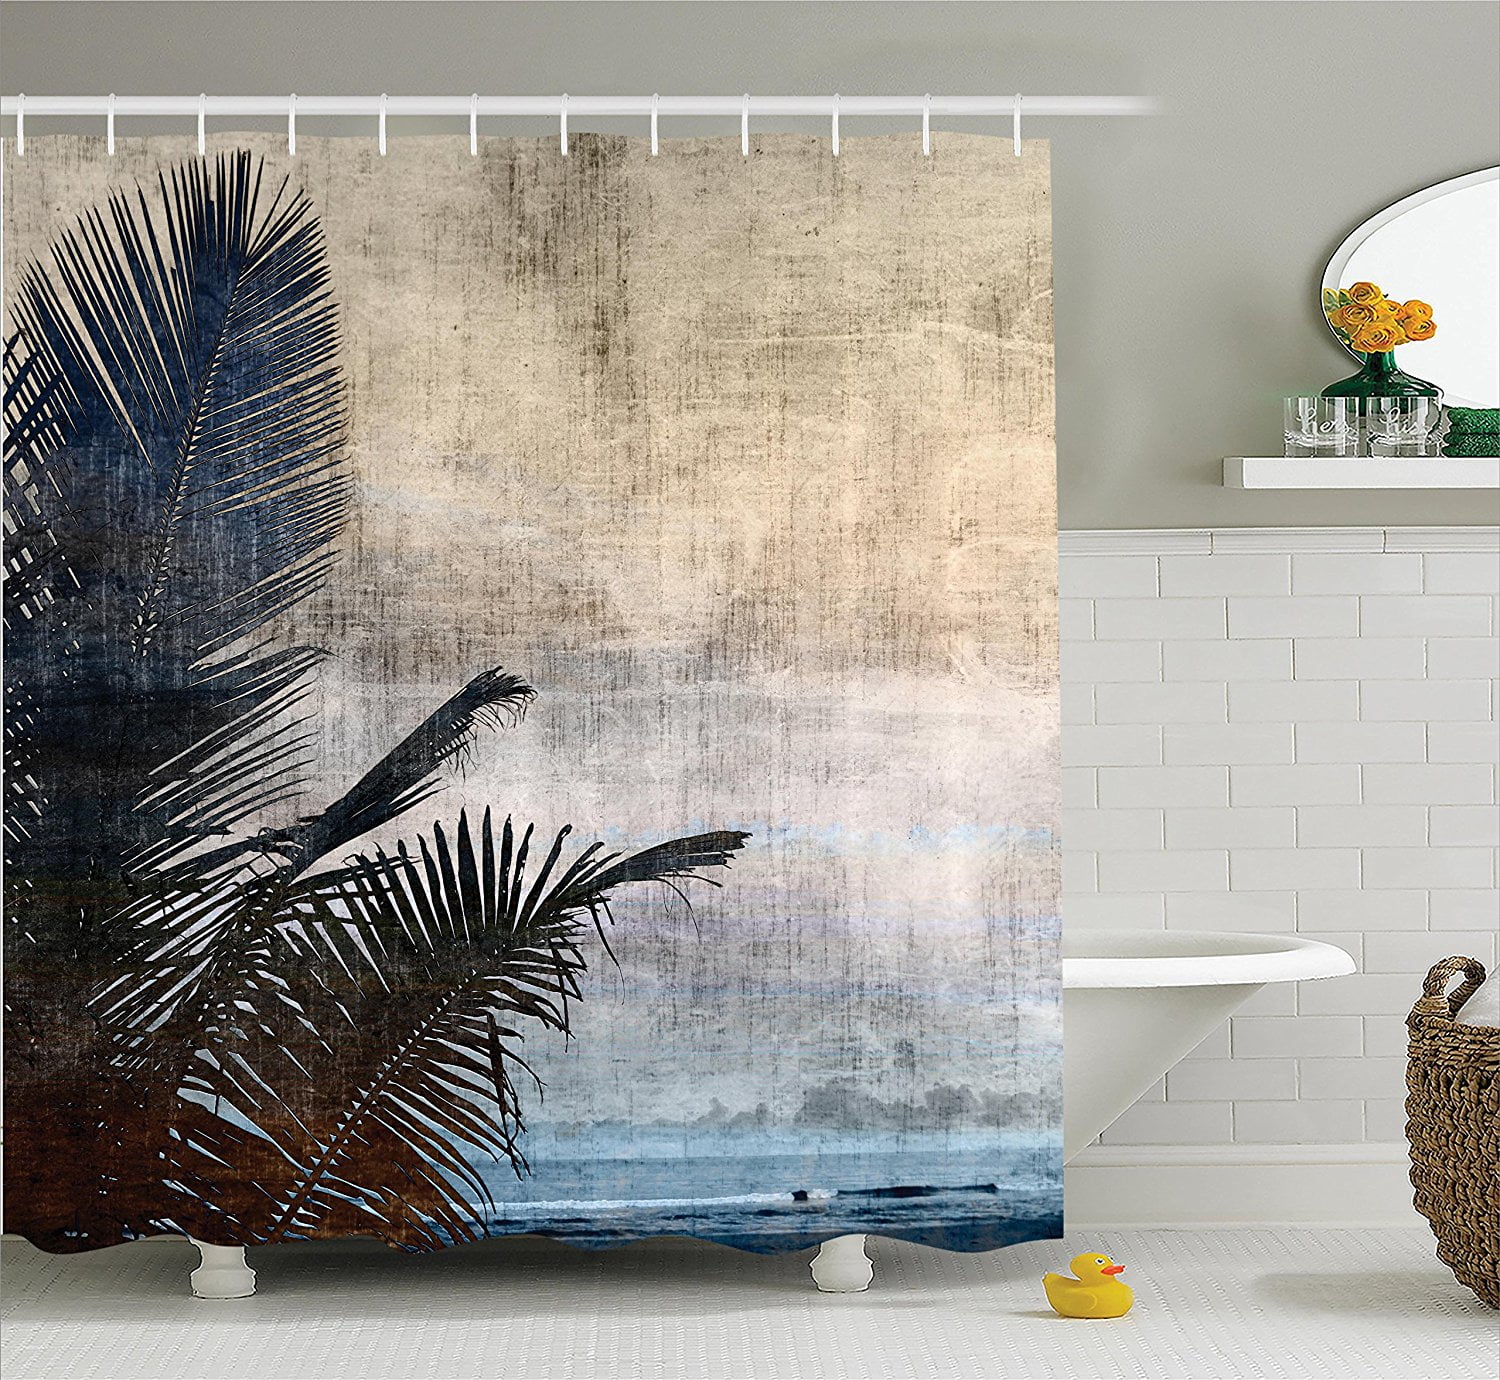 Details about   Bamboo Waterfall Waterproof Bathroom Home Decor Shower Curtain Set With 12 Hooks 